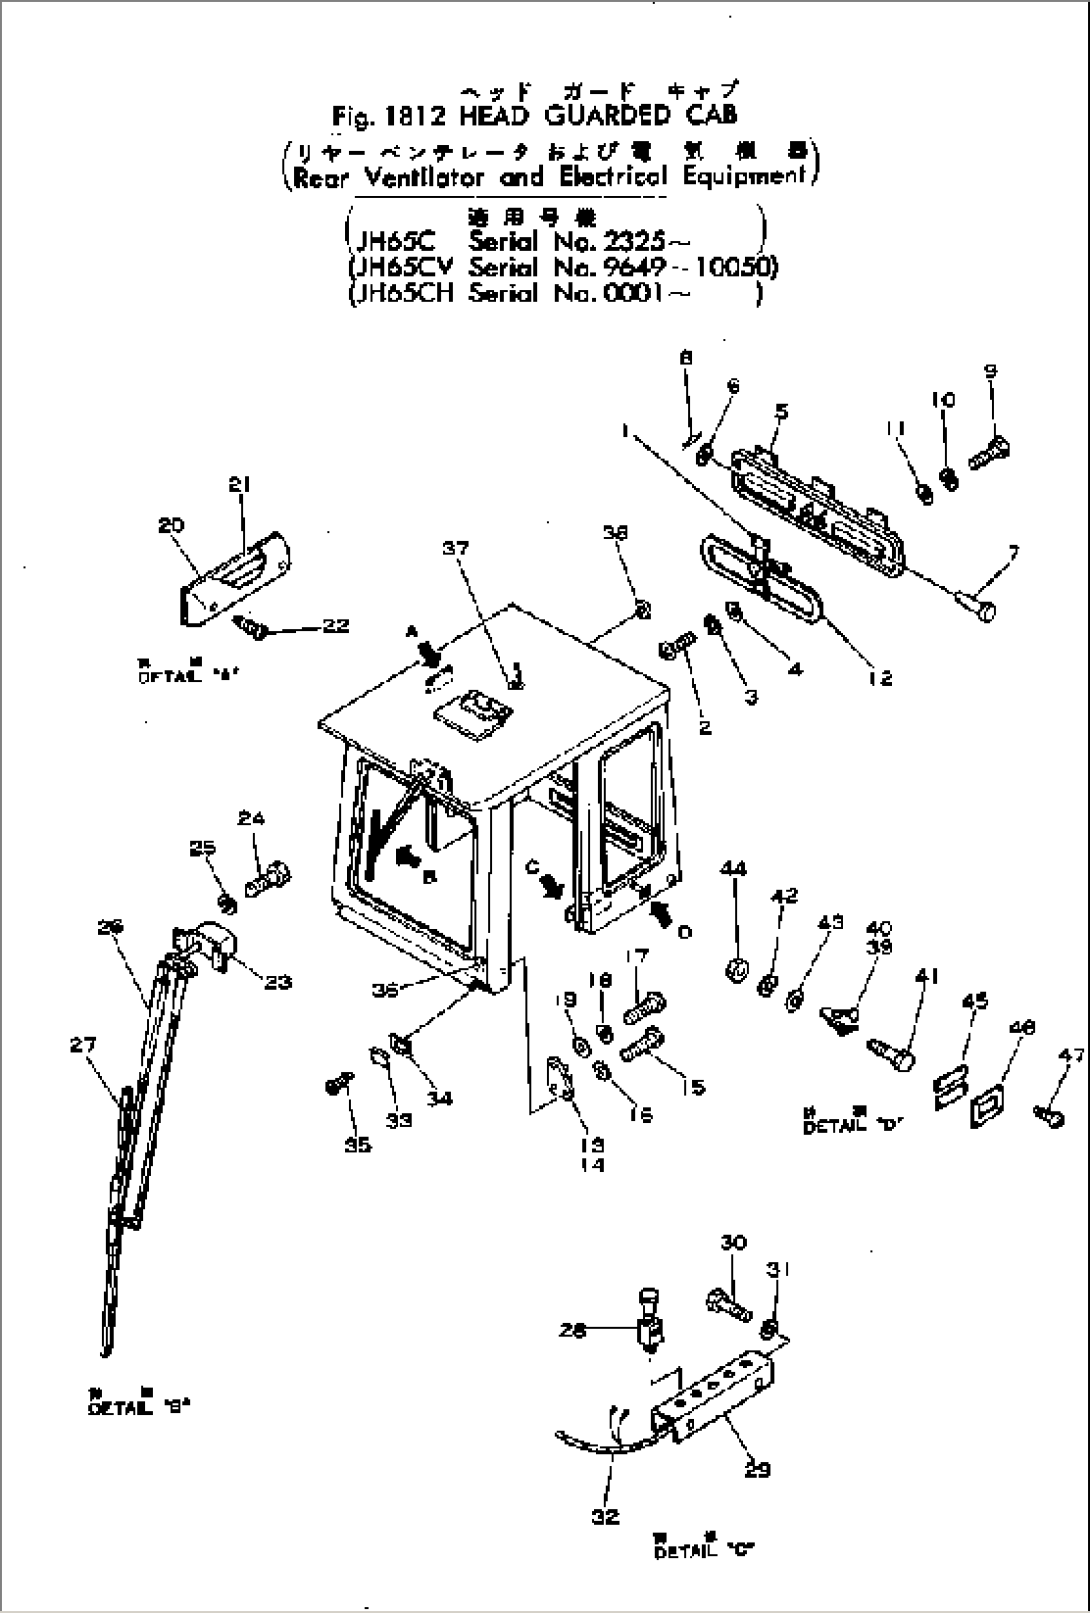 HEAD GUARDED CAB (REAR VENTILATOR AND ELECTRICAL EQUIPMENT)(#9649-10050)